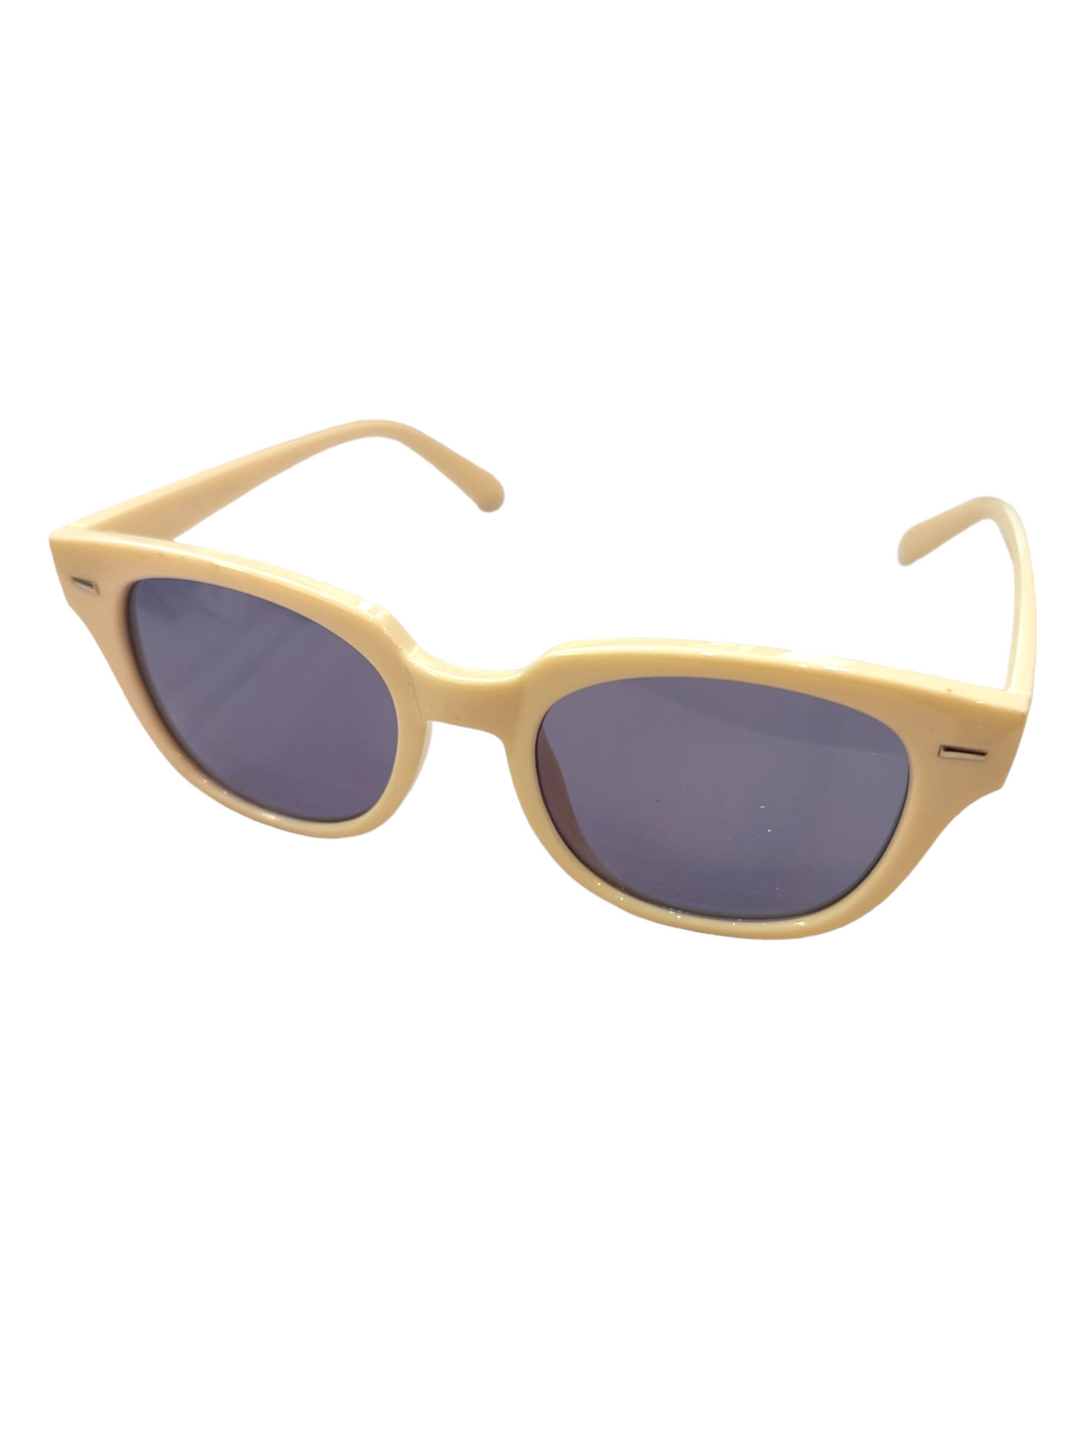 perfect vacation sunglasses in natural